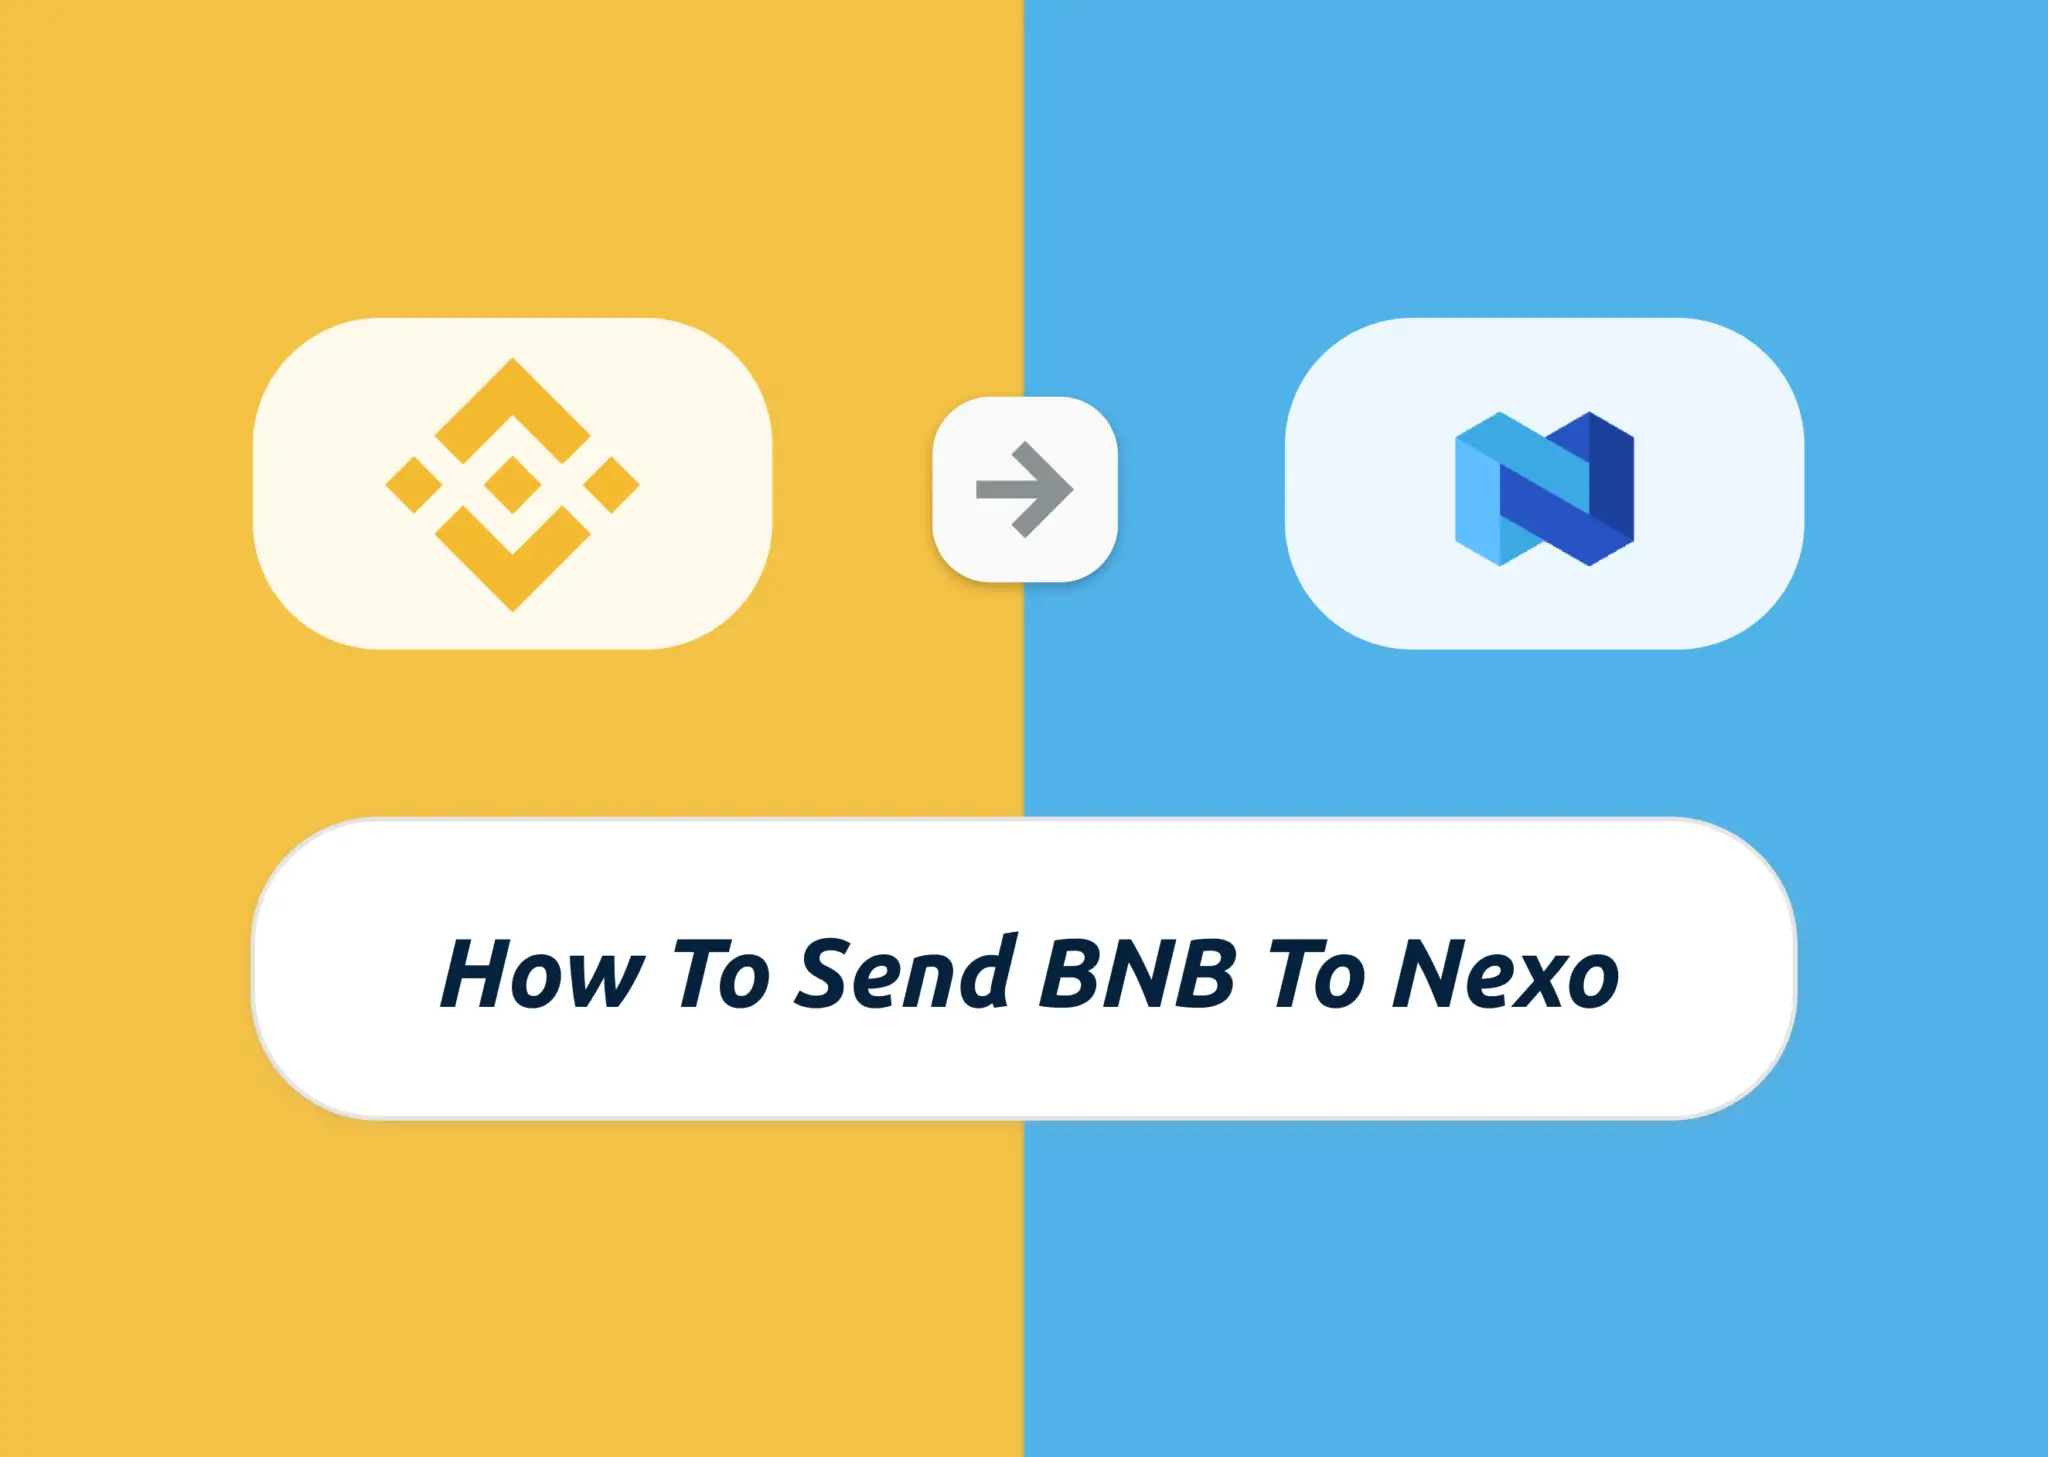 6 Steps To Send BNB To Nexo | Financially Independent ...